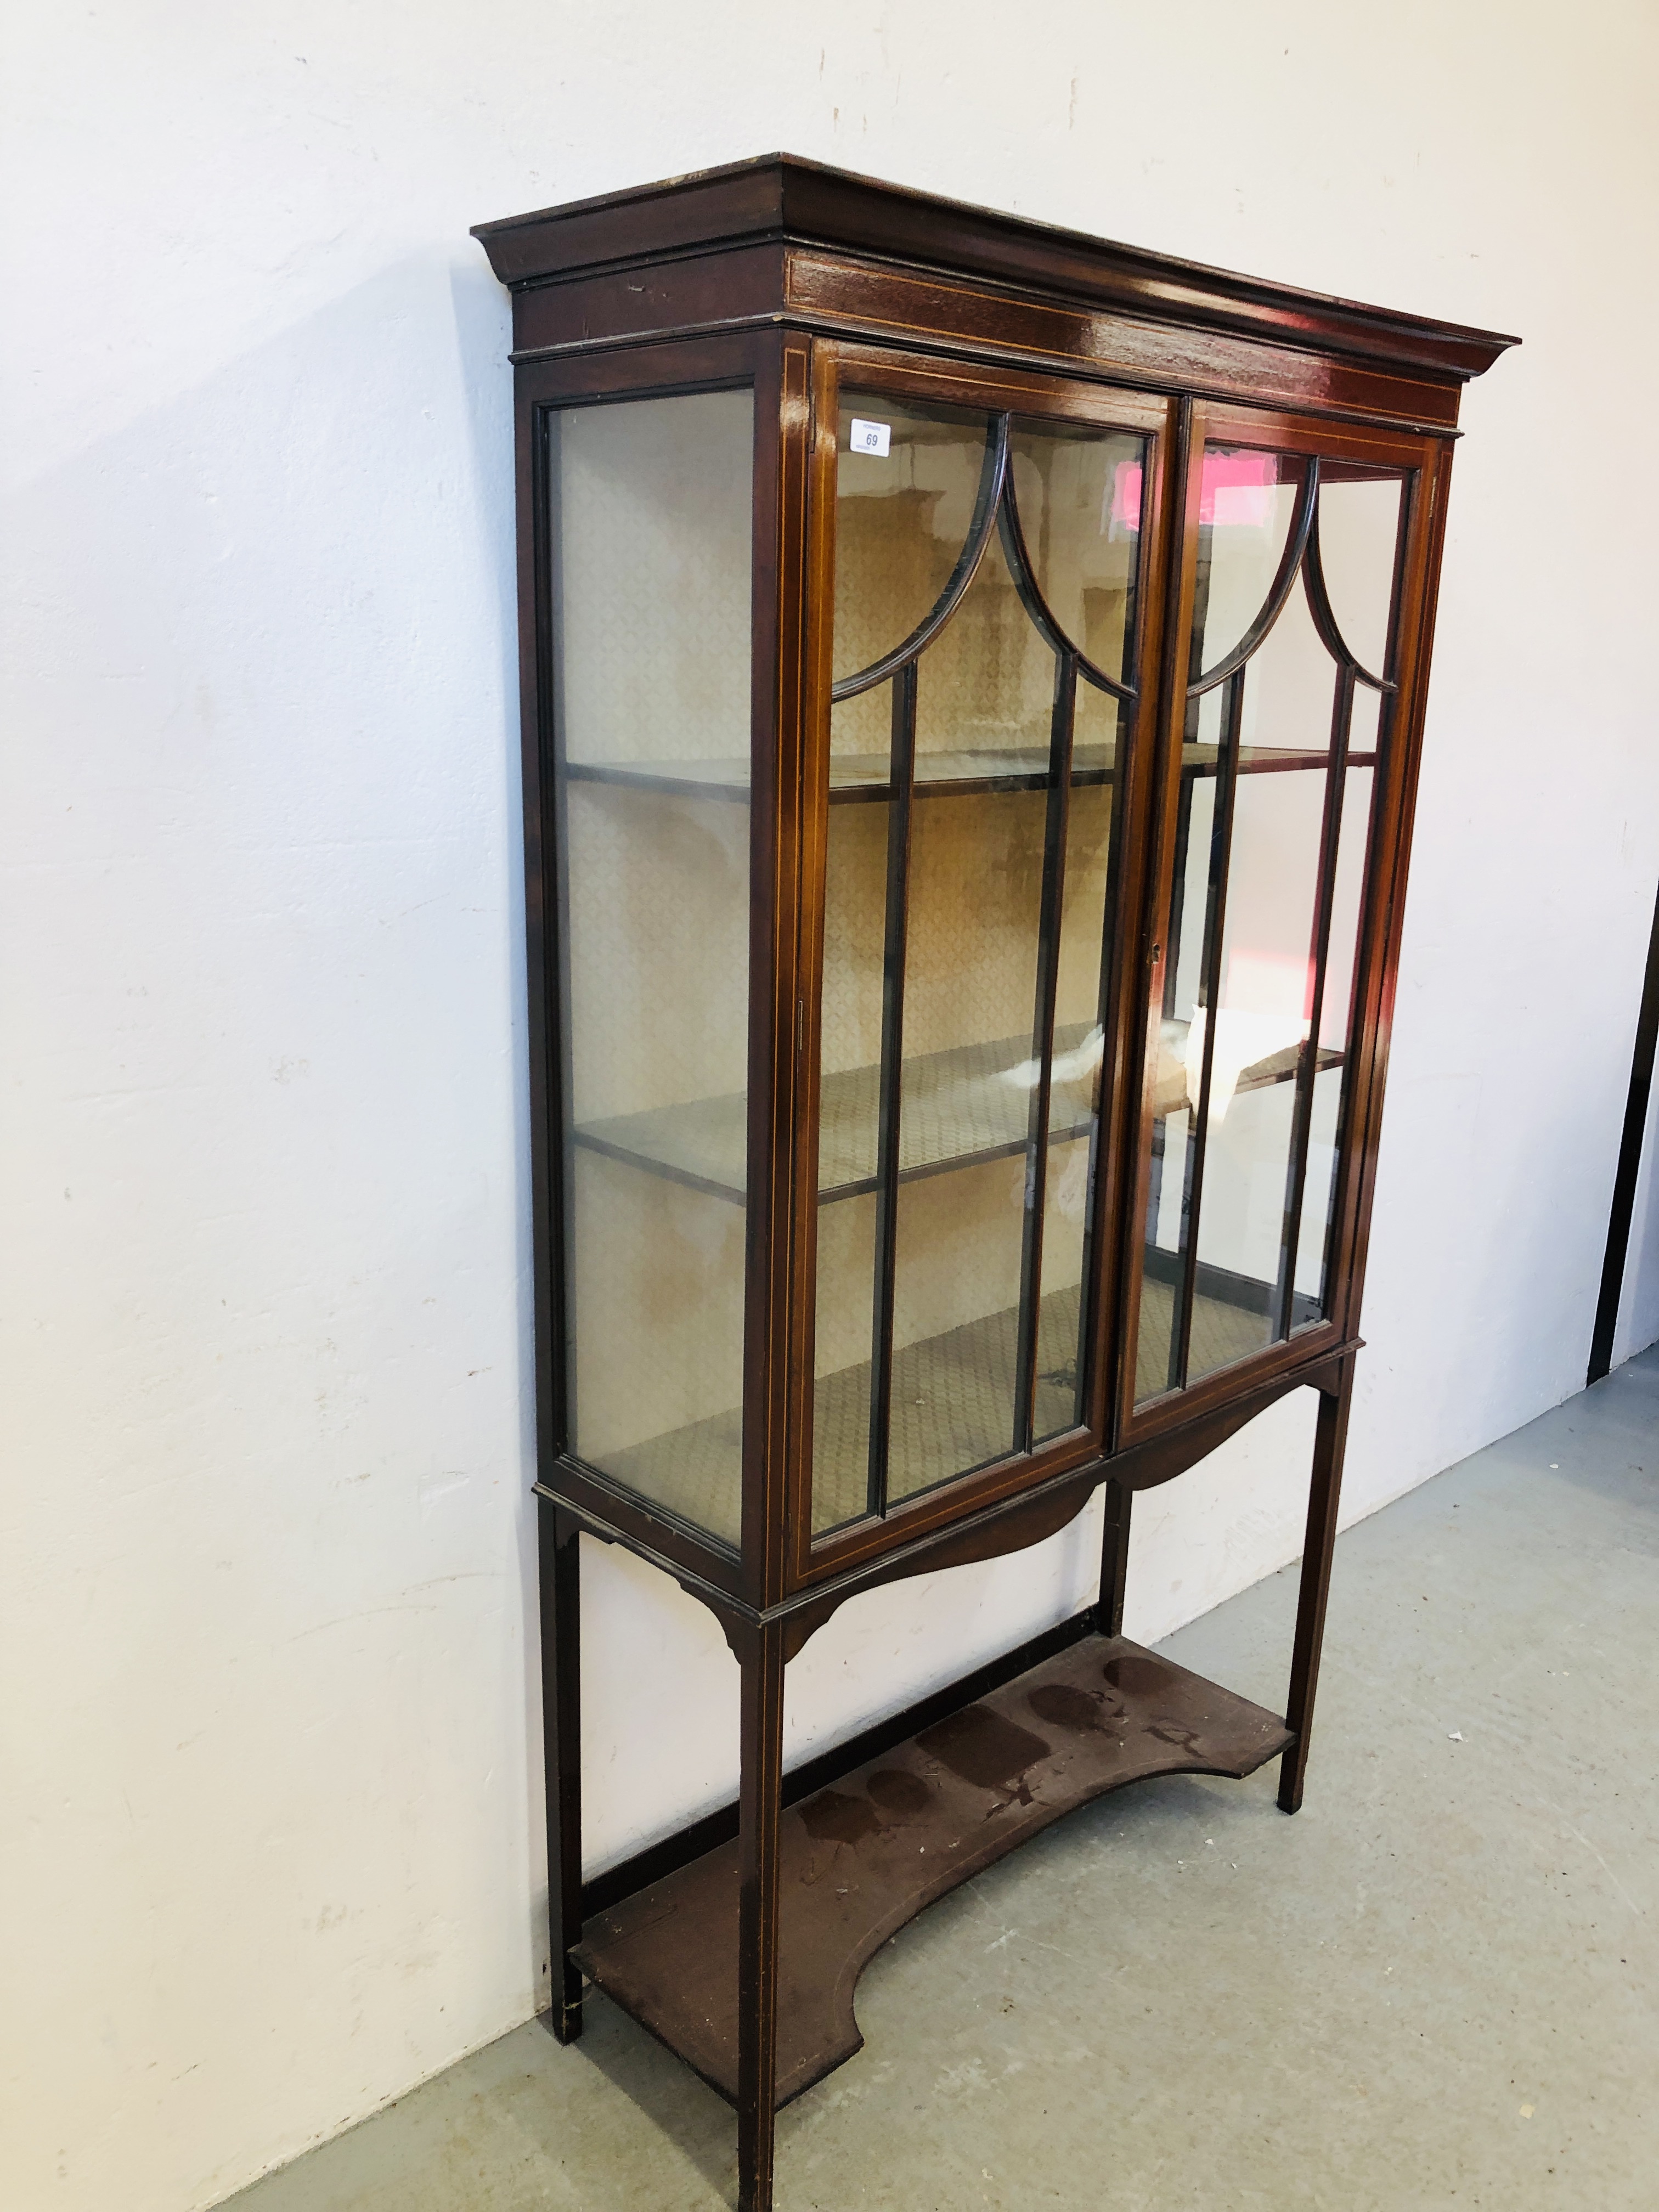 AN ANTIQUE MAHOGANY AND INLAID 2 DOOR GLAZED CABINET WITH LOWER TIER W 100CM X D 36CM X H 170CM. - Image 2 of 6